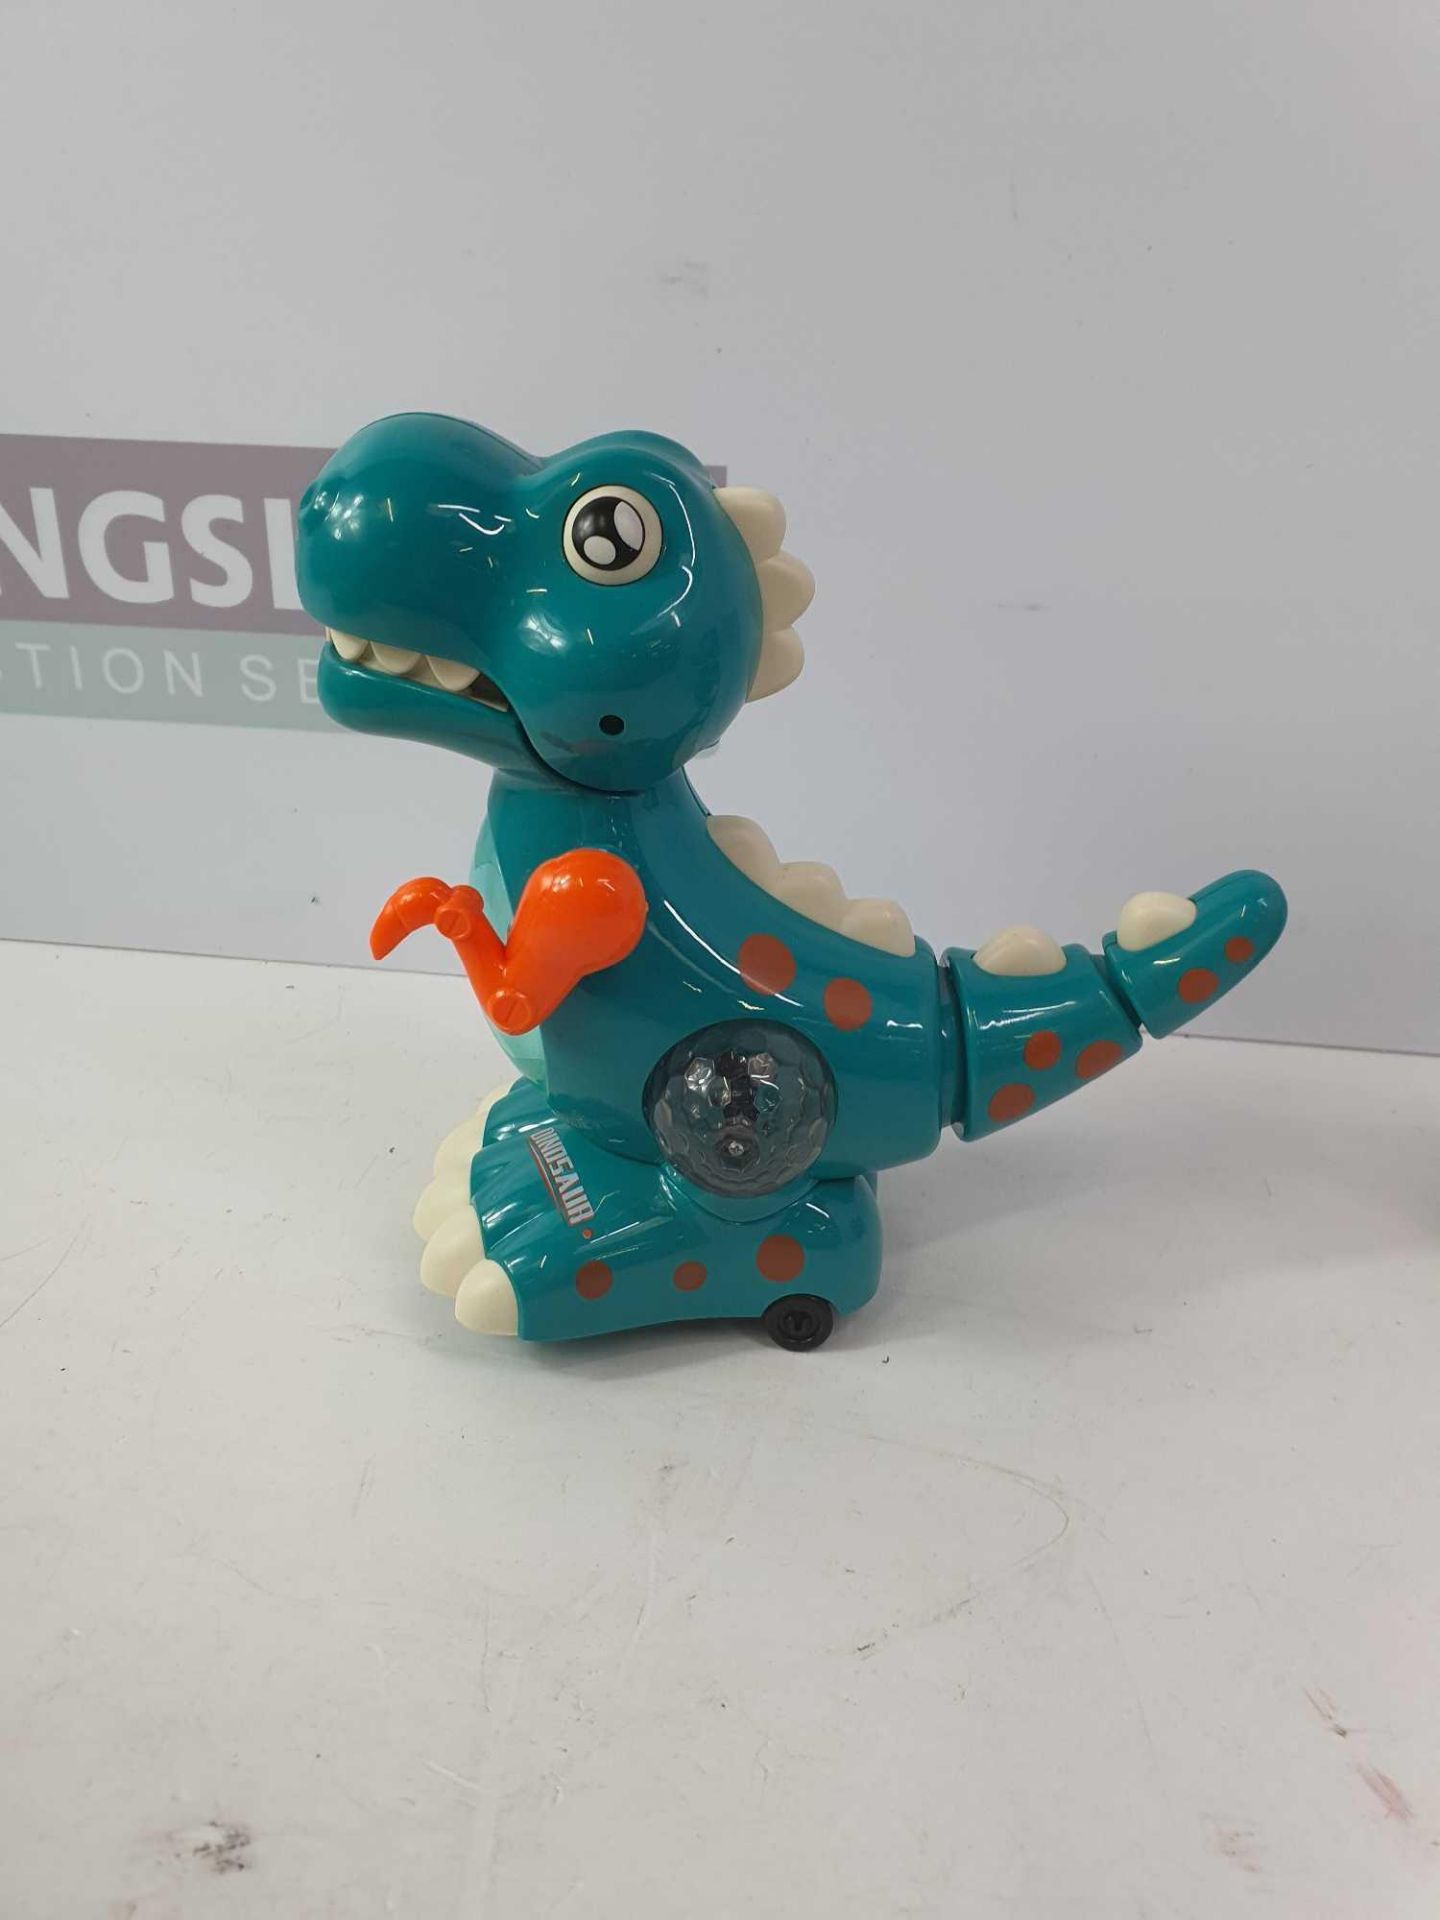 DINOSAUR ROBOT AND LIGHT PROJECTOR - Image 3 of 4